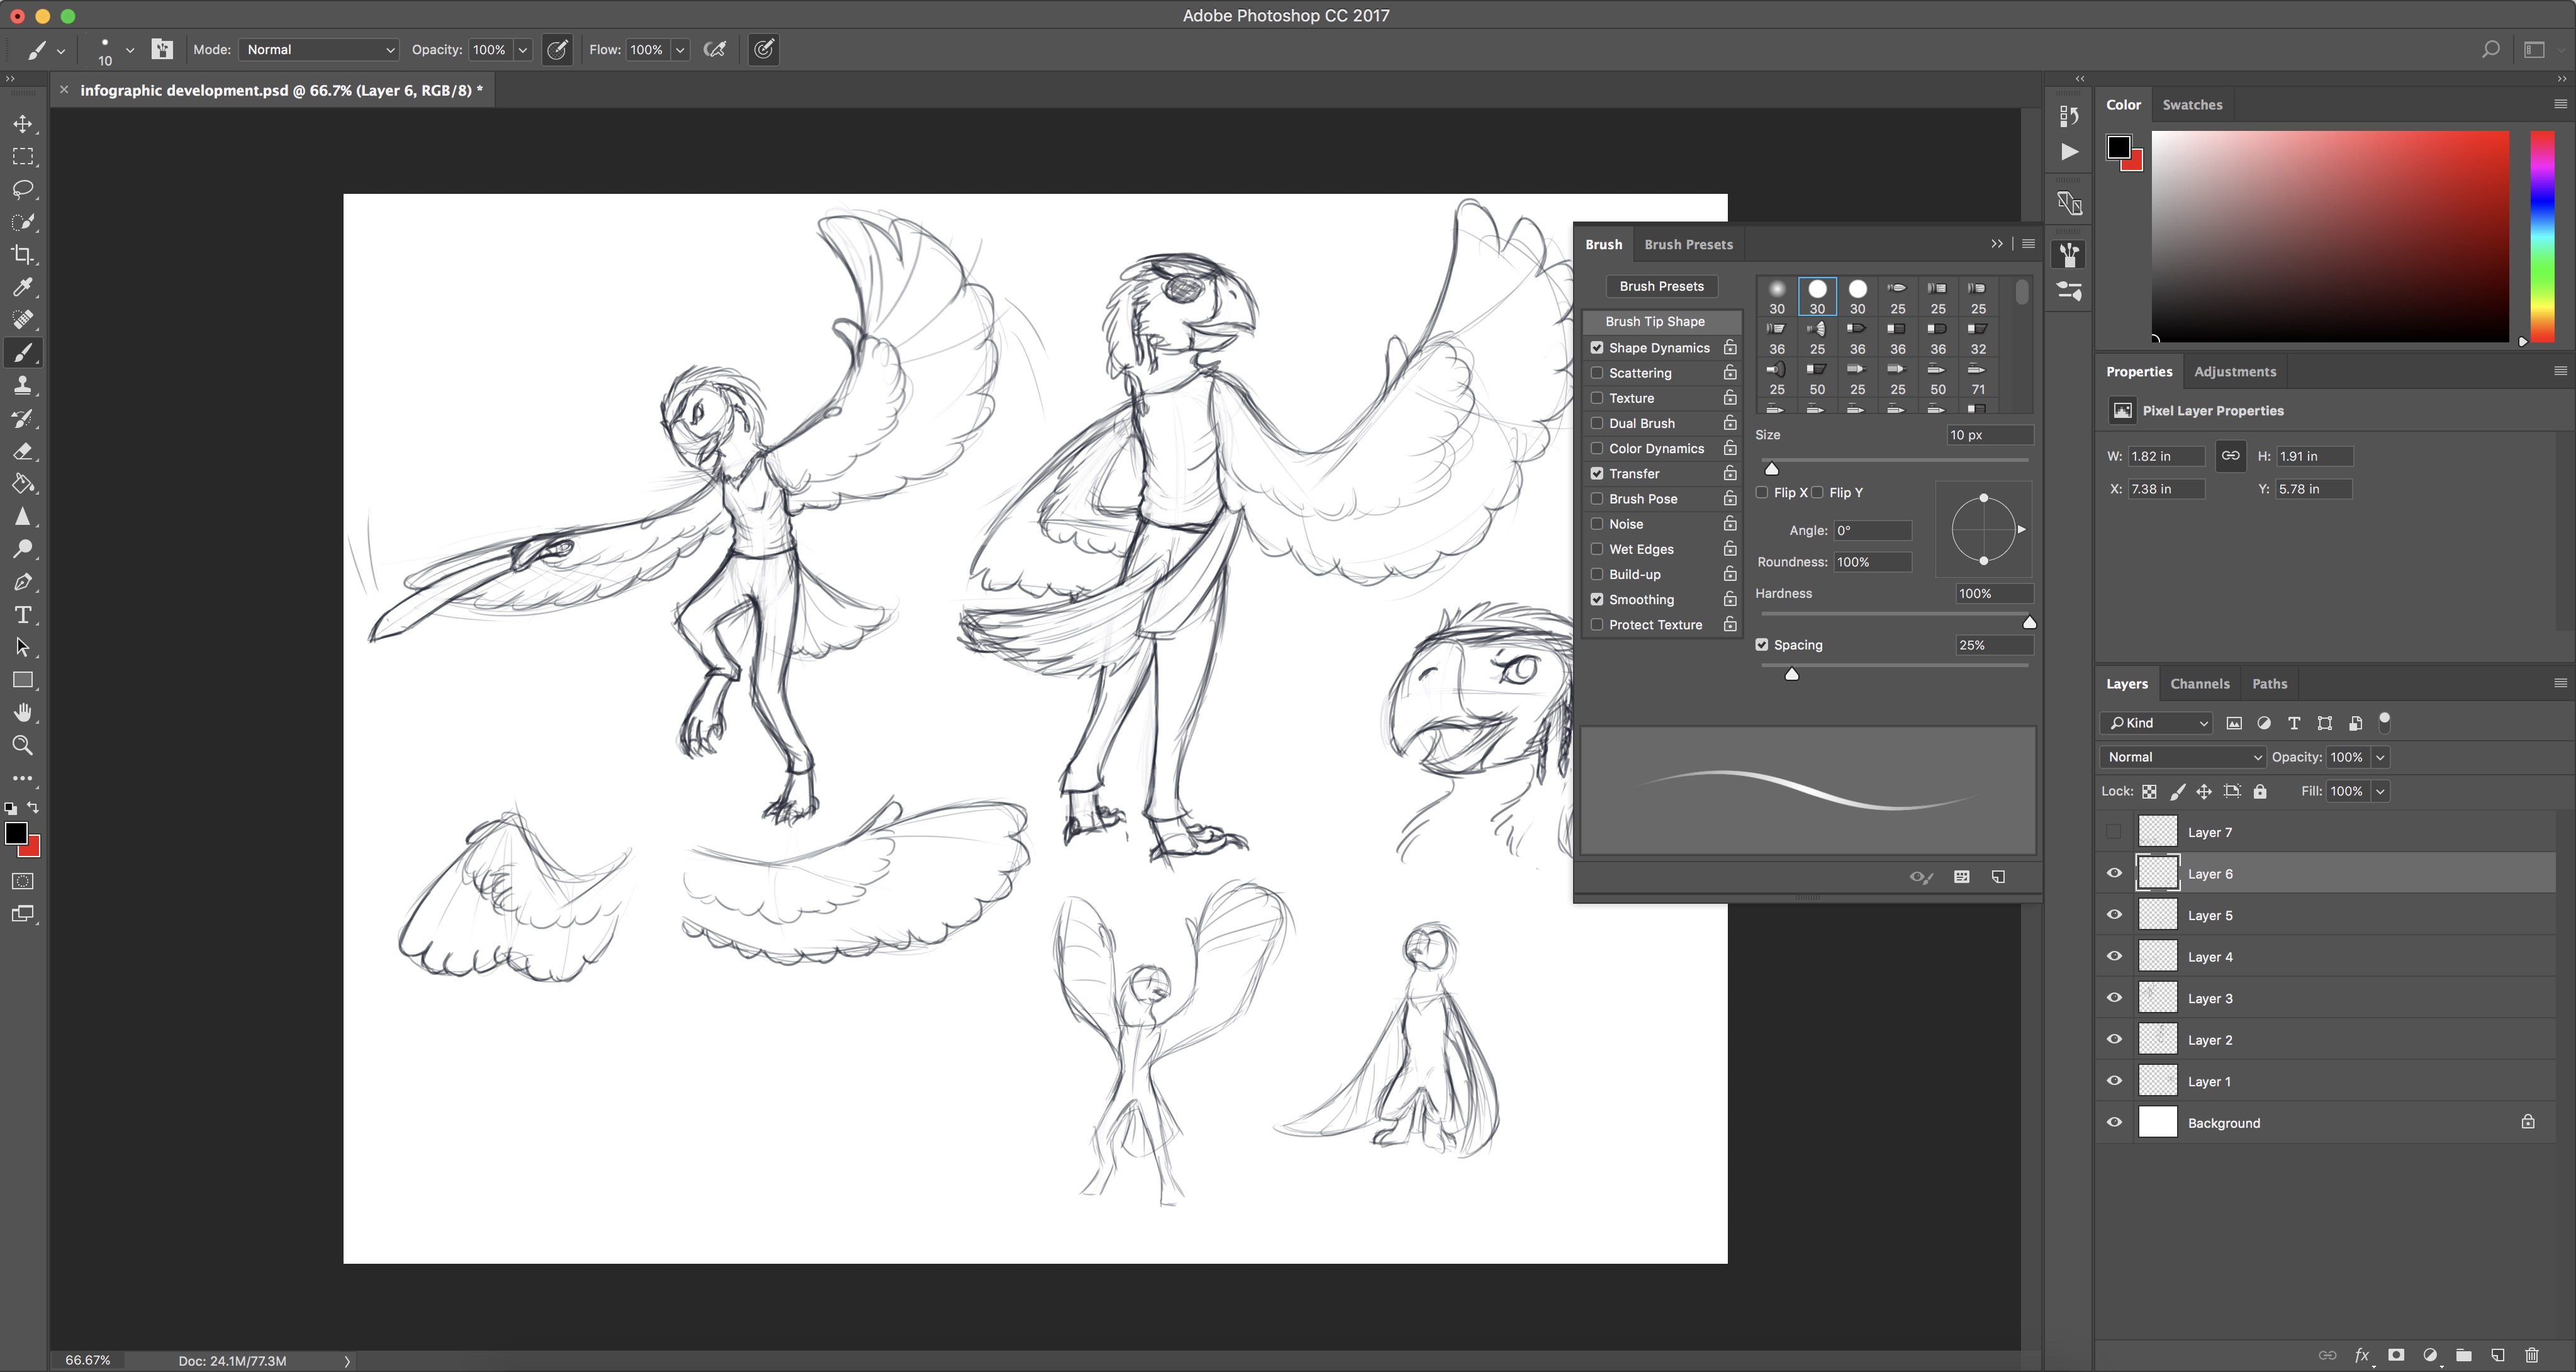 Screenshot of the Photoshop file for the initial page of sketches